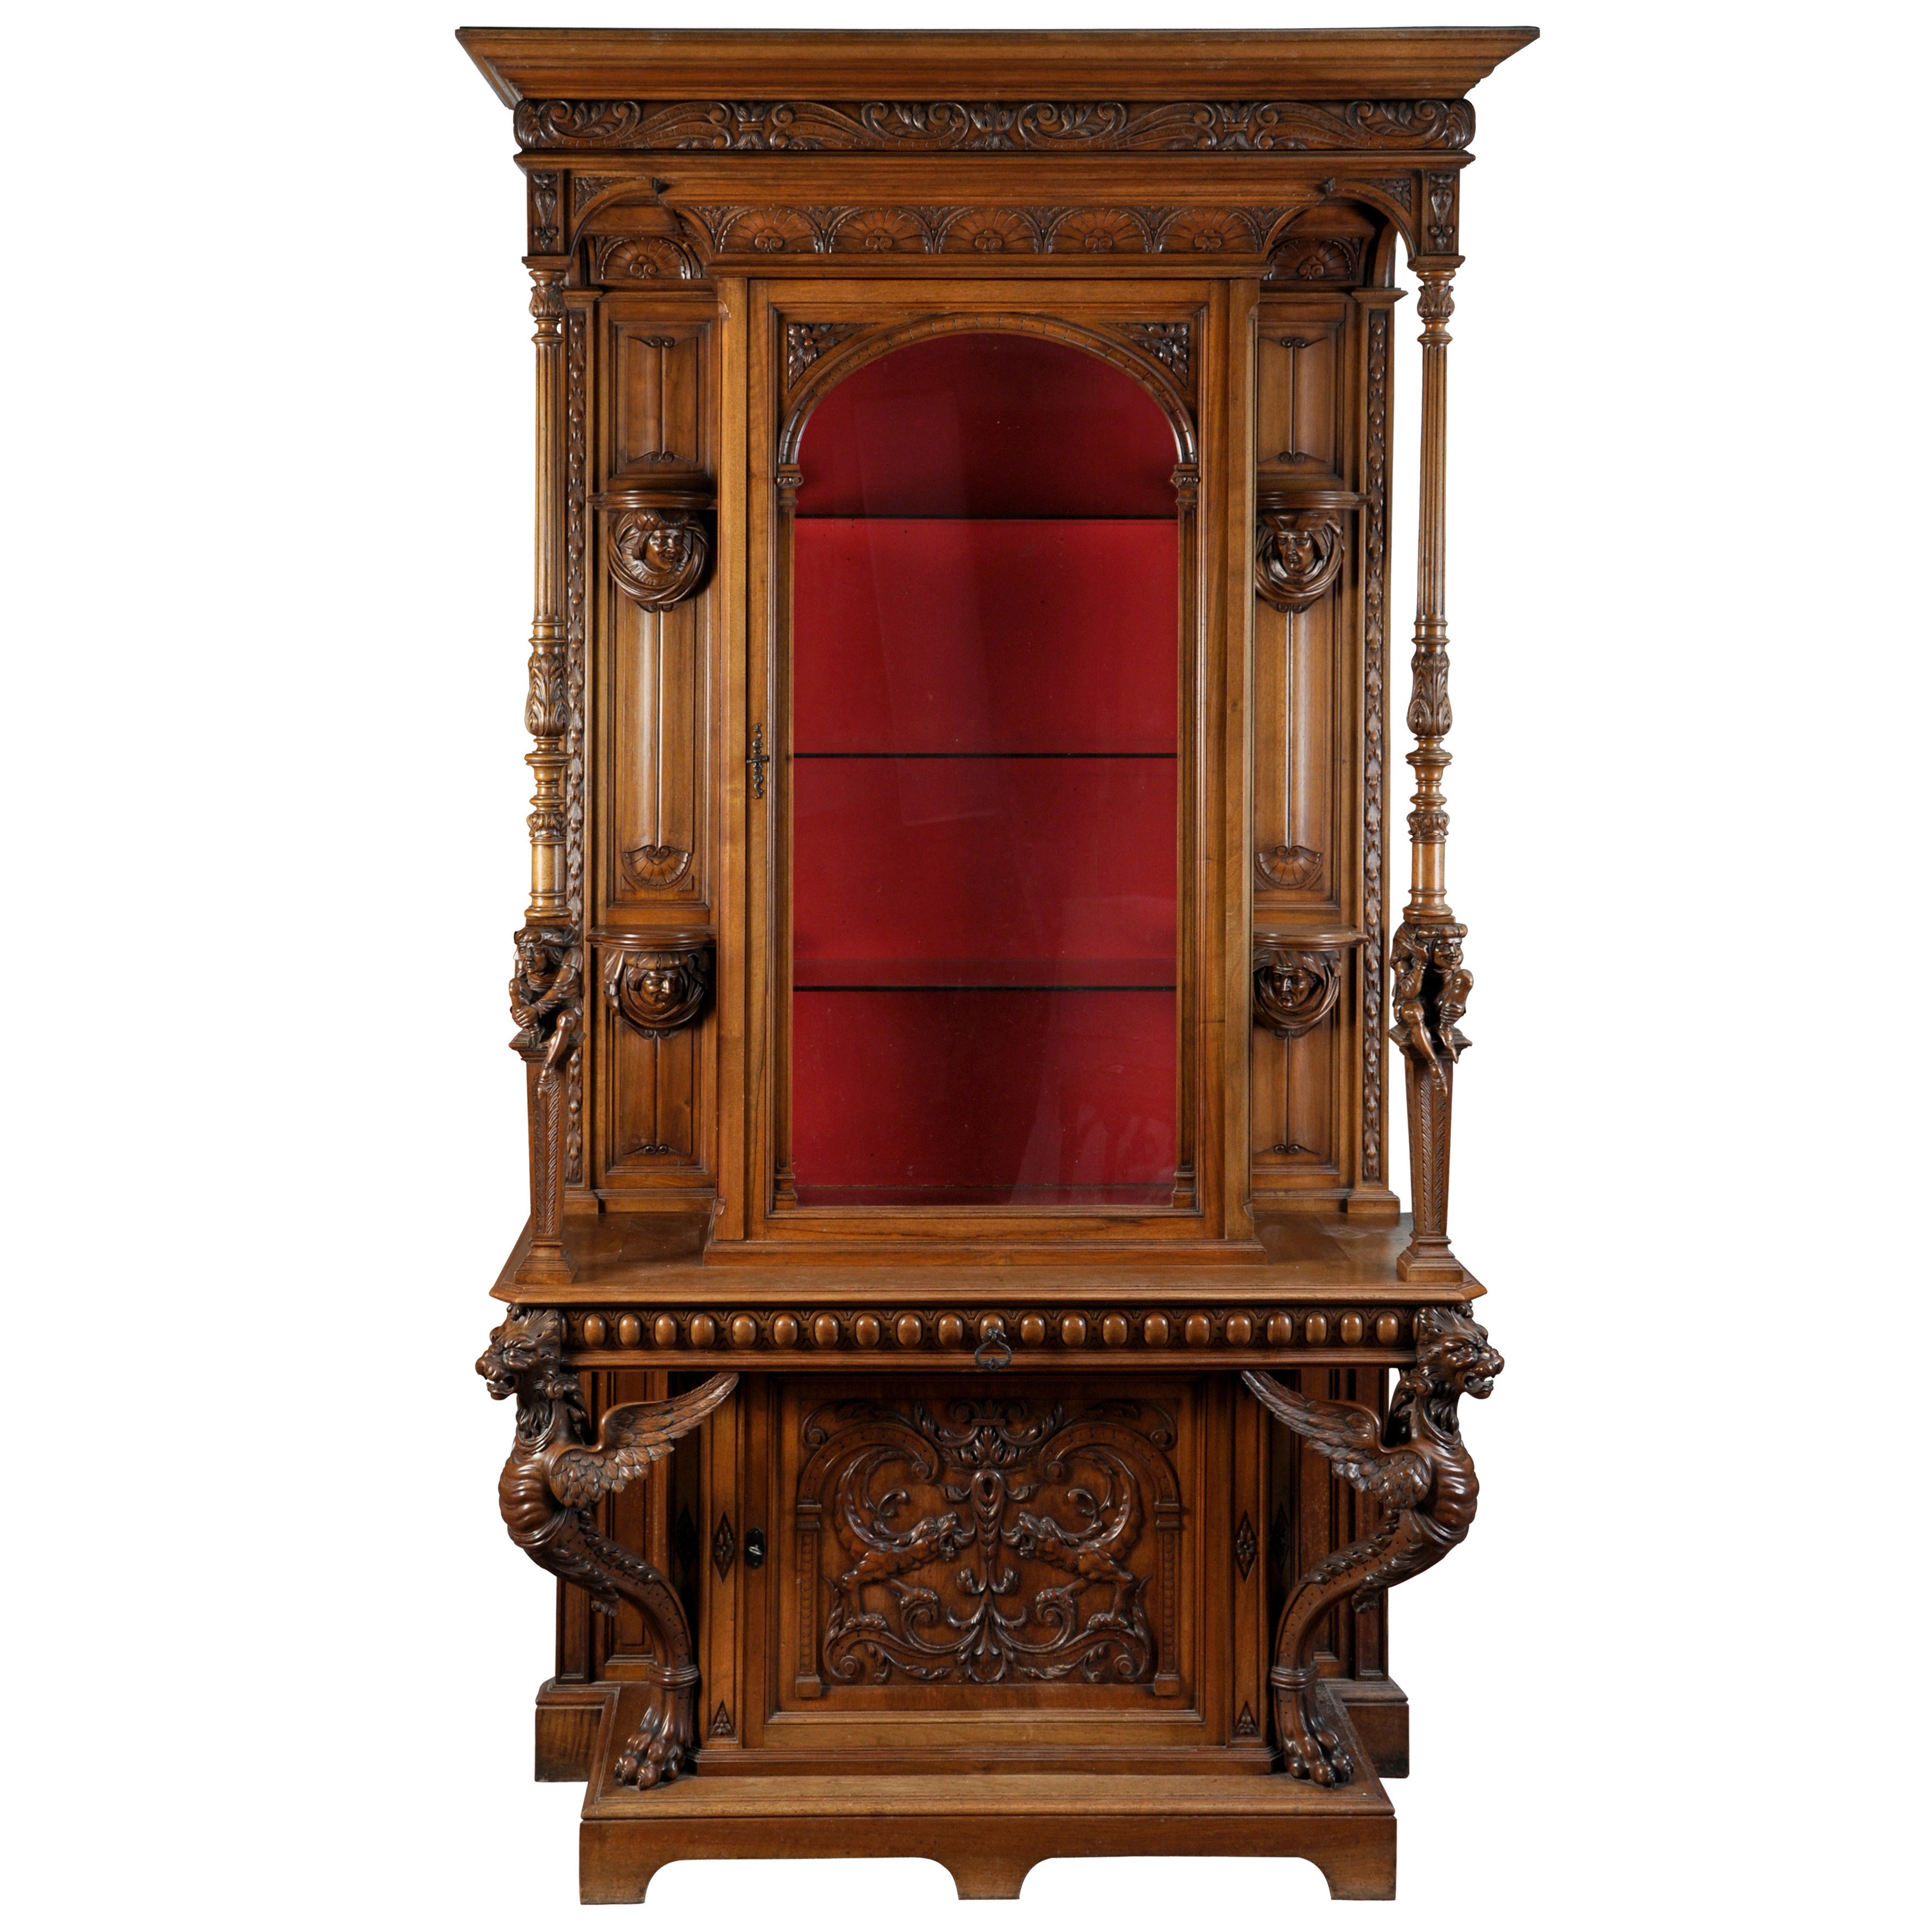 BELLANGER, cabinetmaker : Neo-Renaissance style cabinet with chimeras decor For Sale